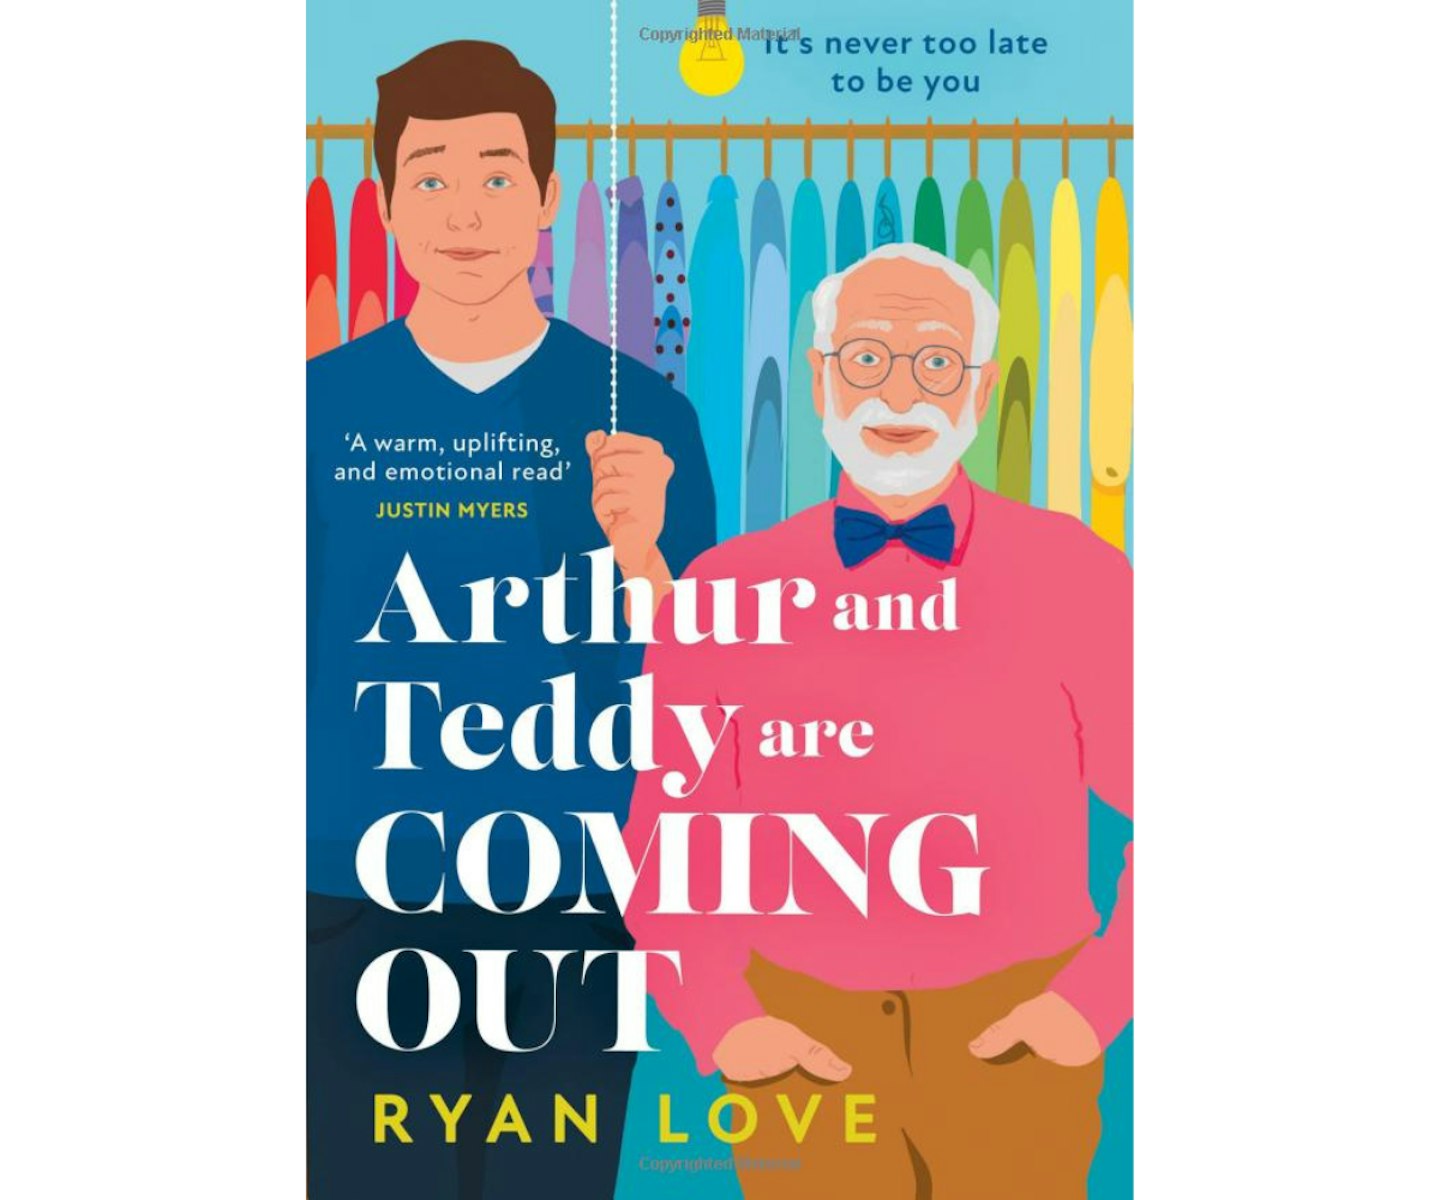 Arthur and Teddy are Coming Out by Ryan Love